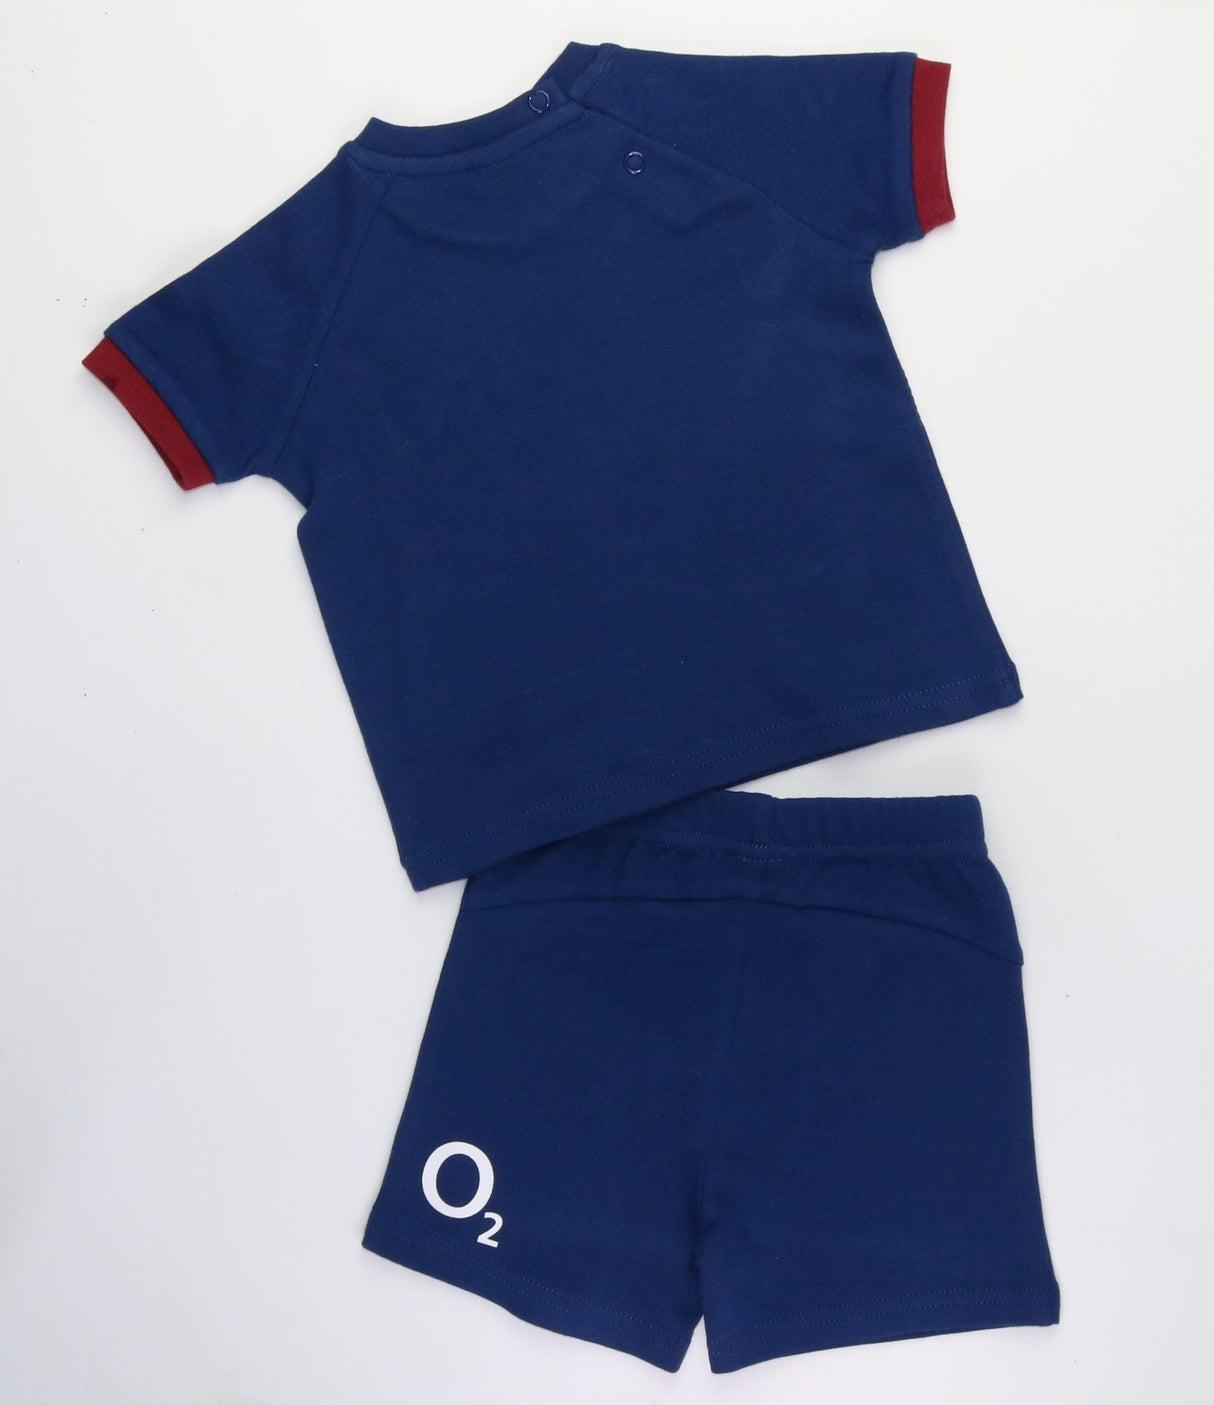 England Rugby Infants Away Replica Kit 23/24 |Infants | Brecrest | Absolute Rugby